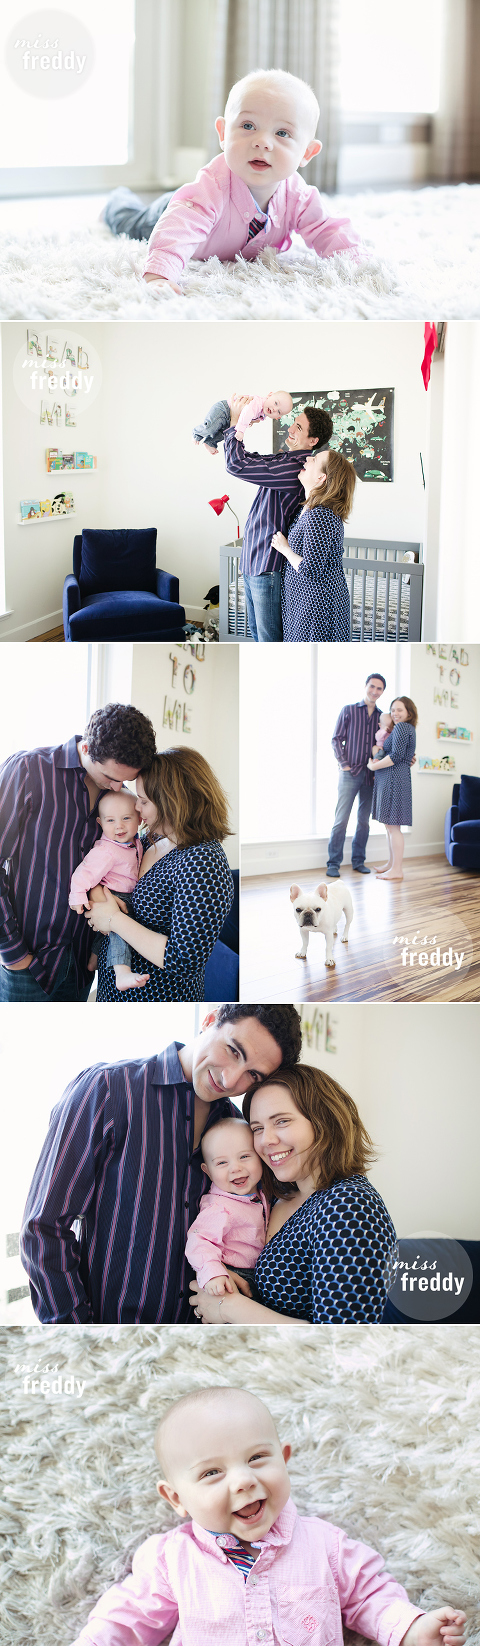 Cute six month baby photos taken by kids photographer, Miss Freddy. The nursery is a must see!